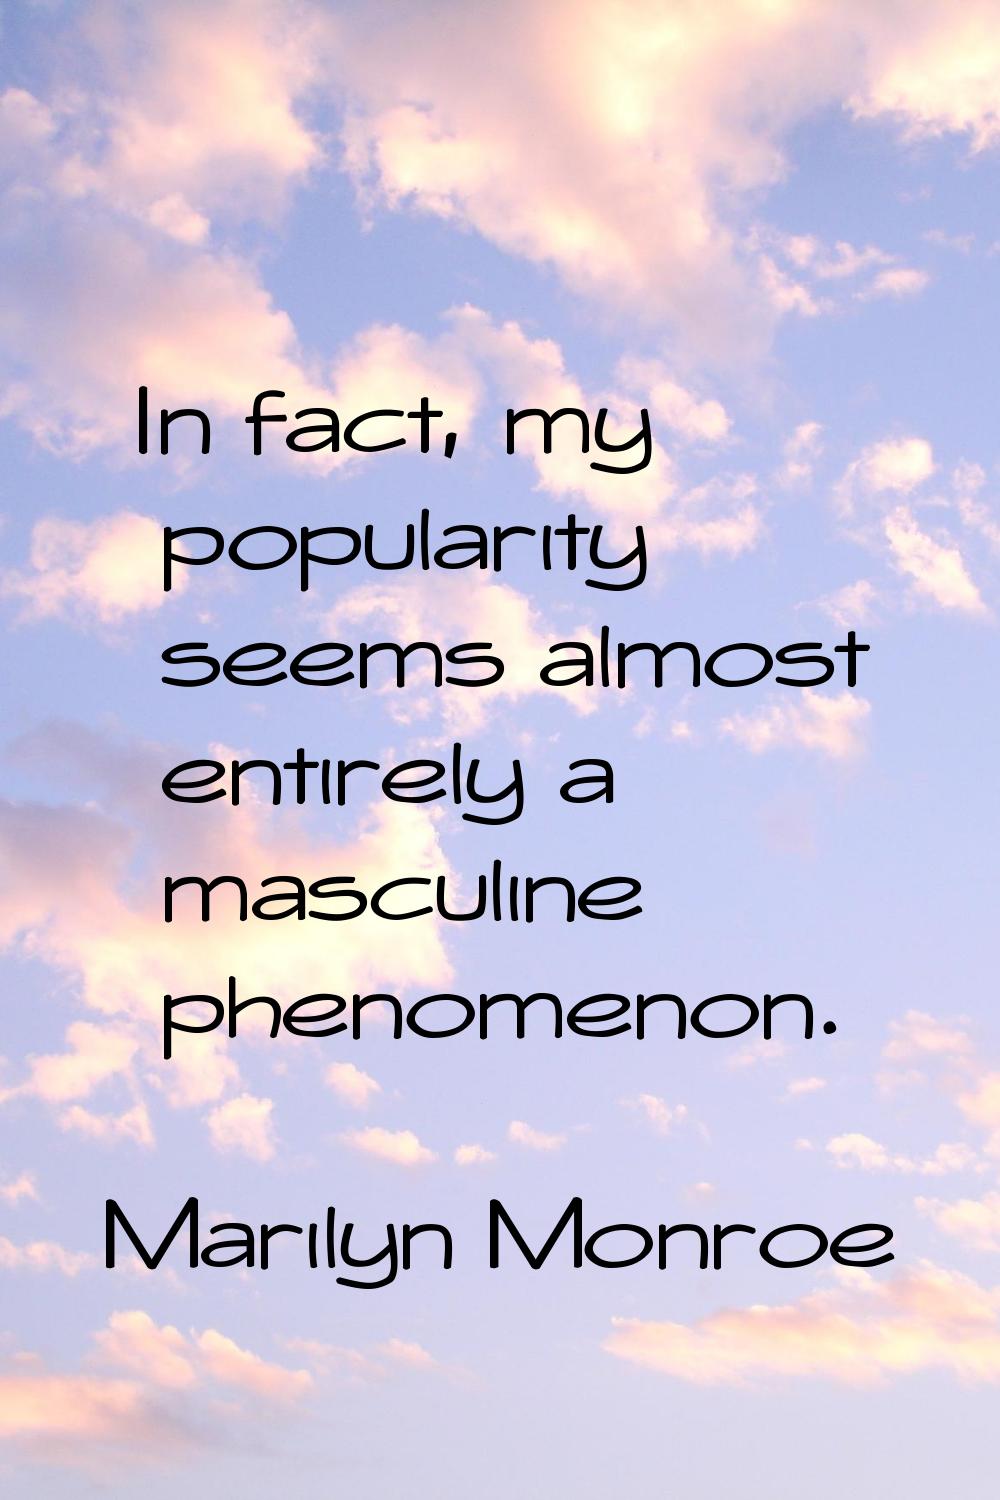 In fact, my popularity seems almost entirely a masculine phenomenon.